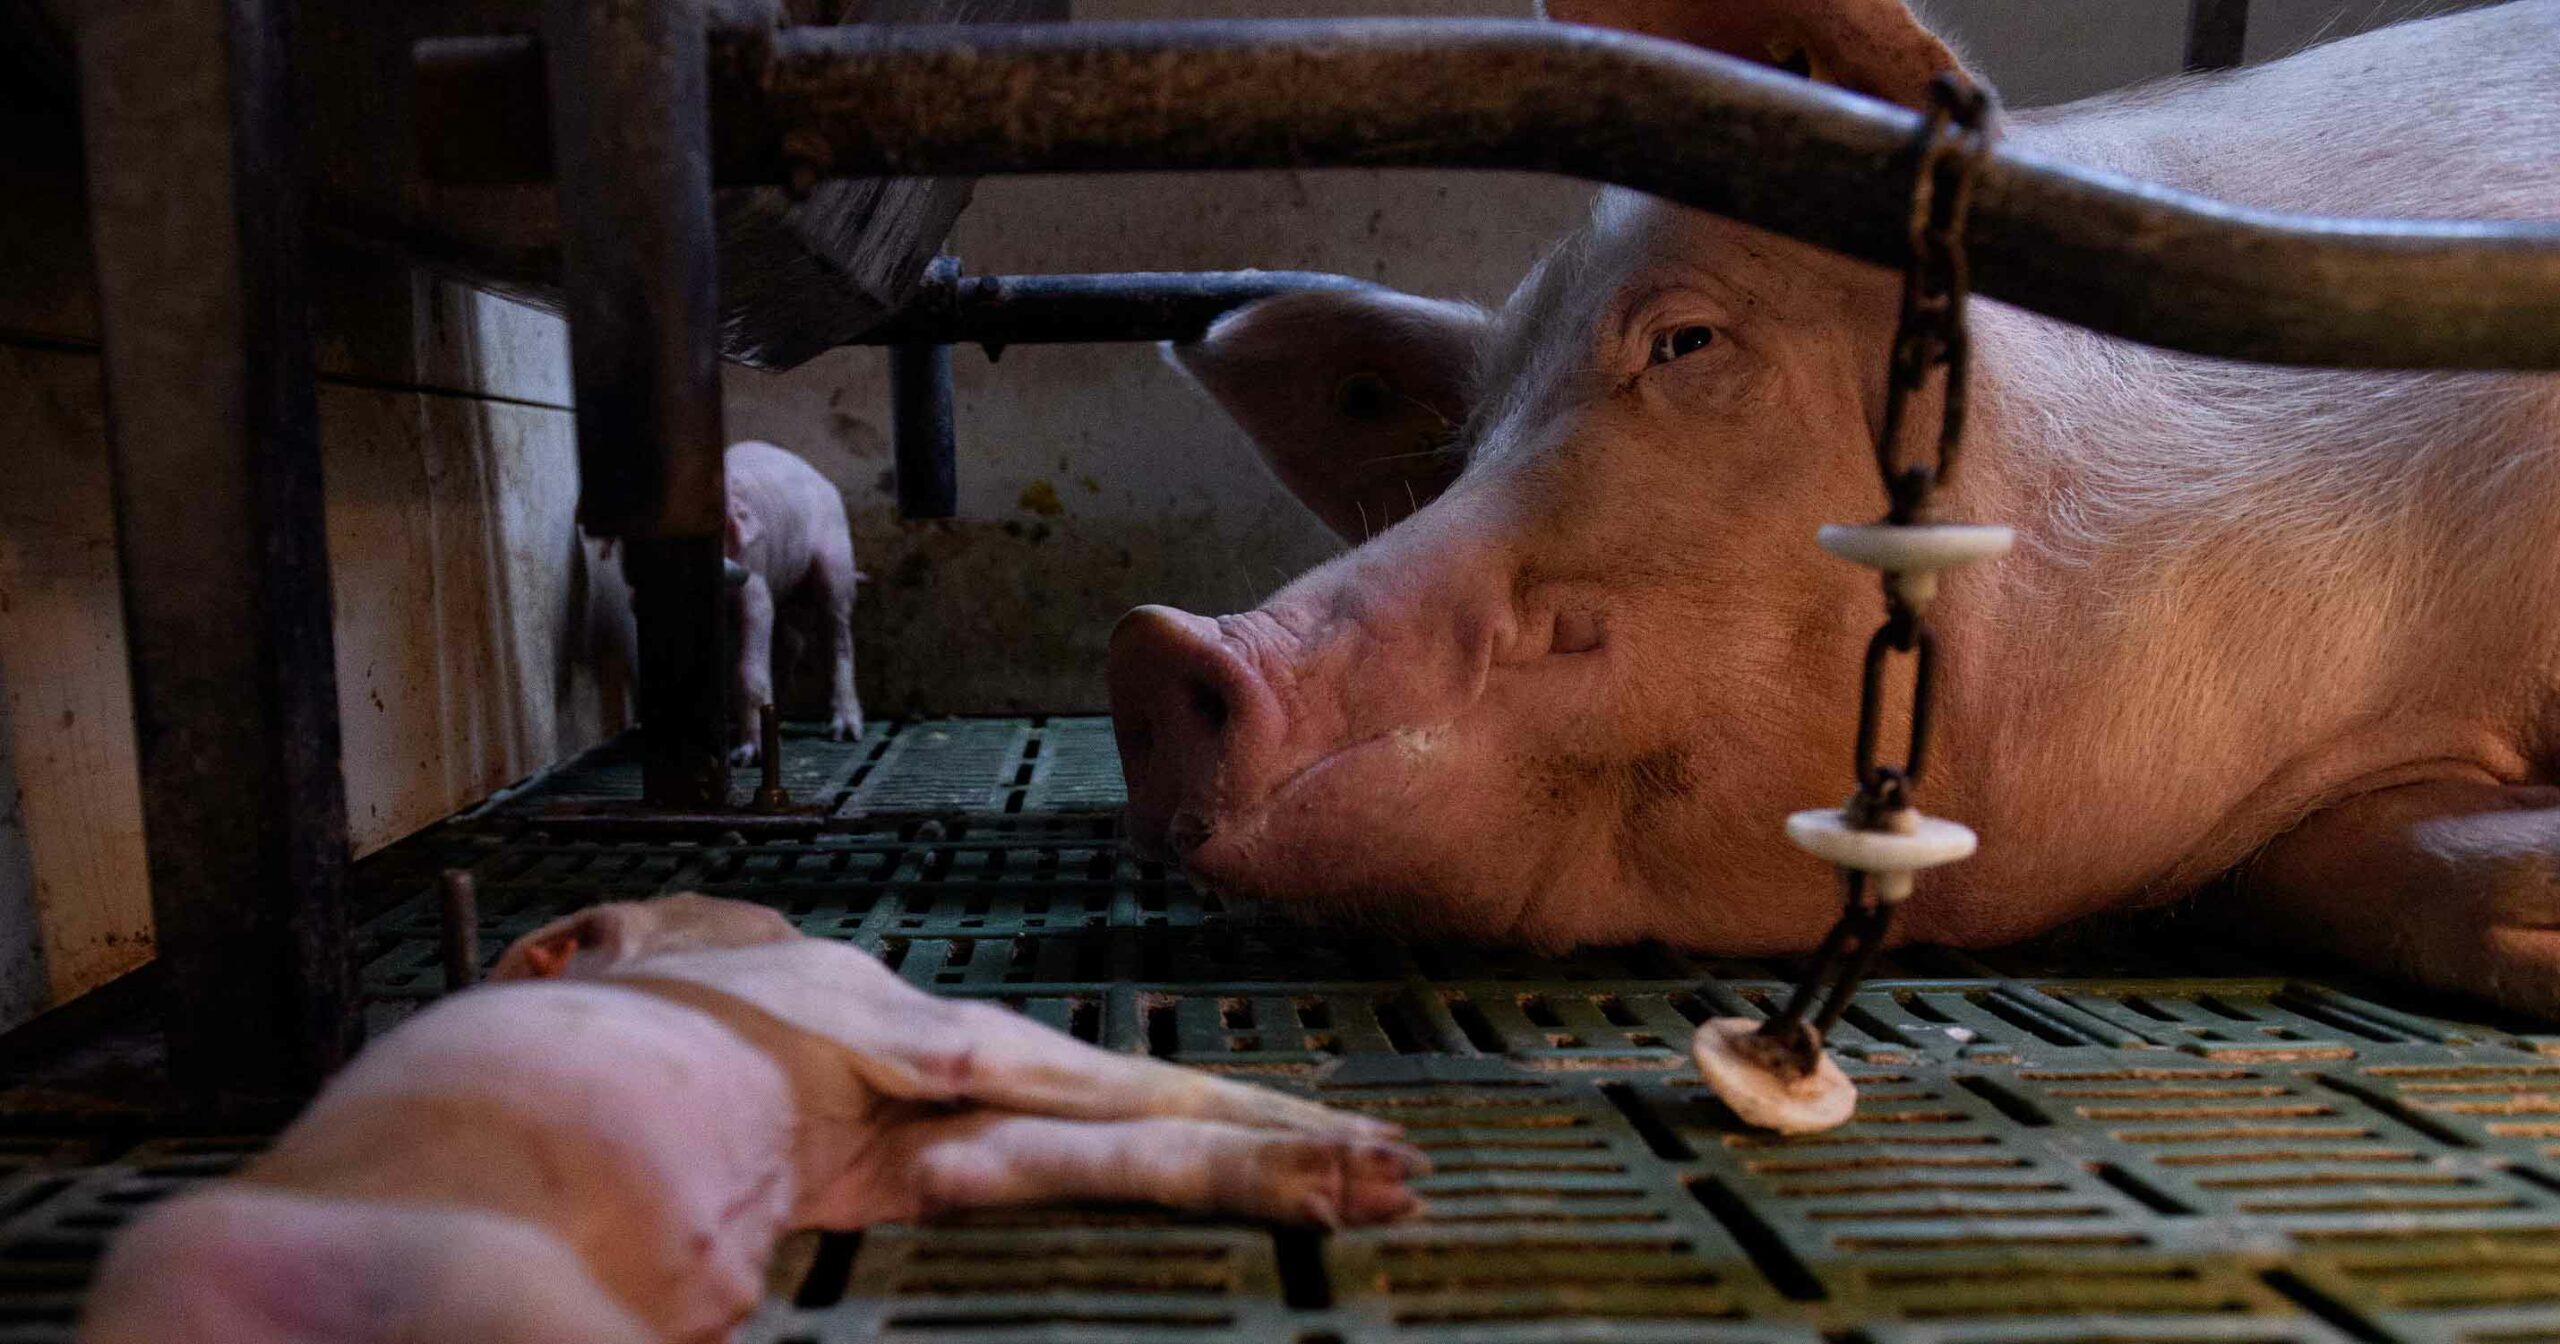 Spanish Pig Farms: Injury, Confinement, and Death Revealed